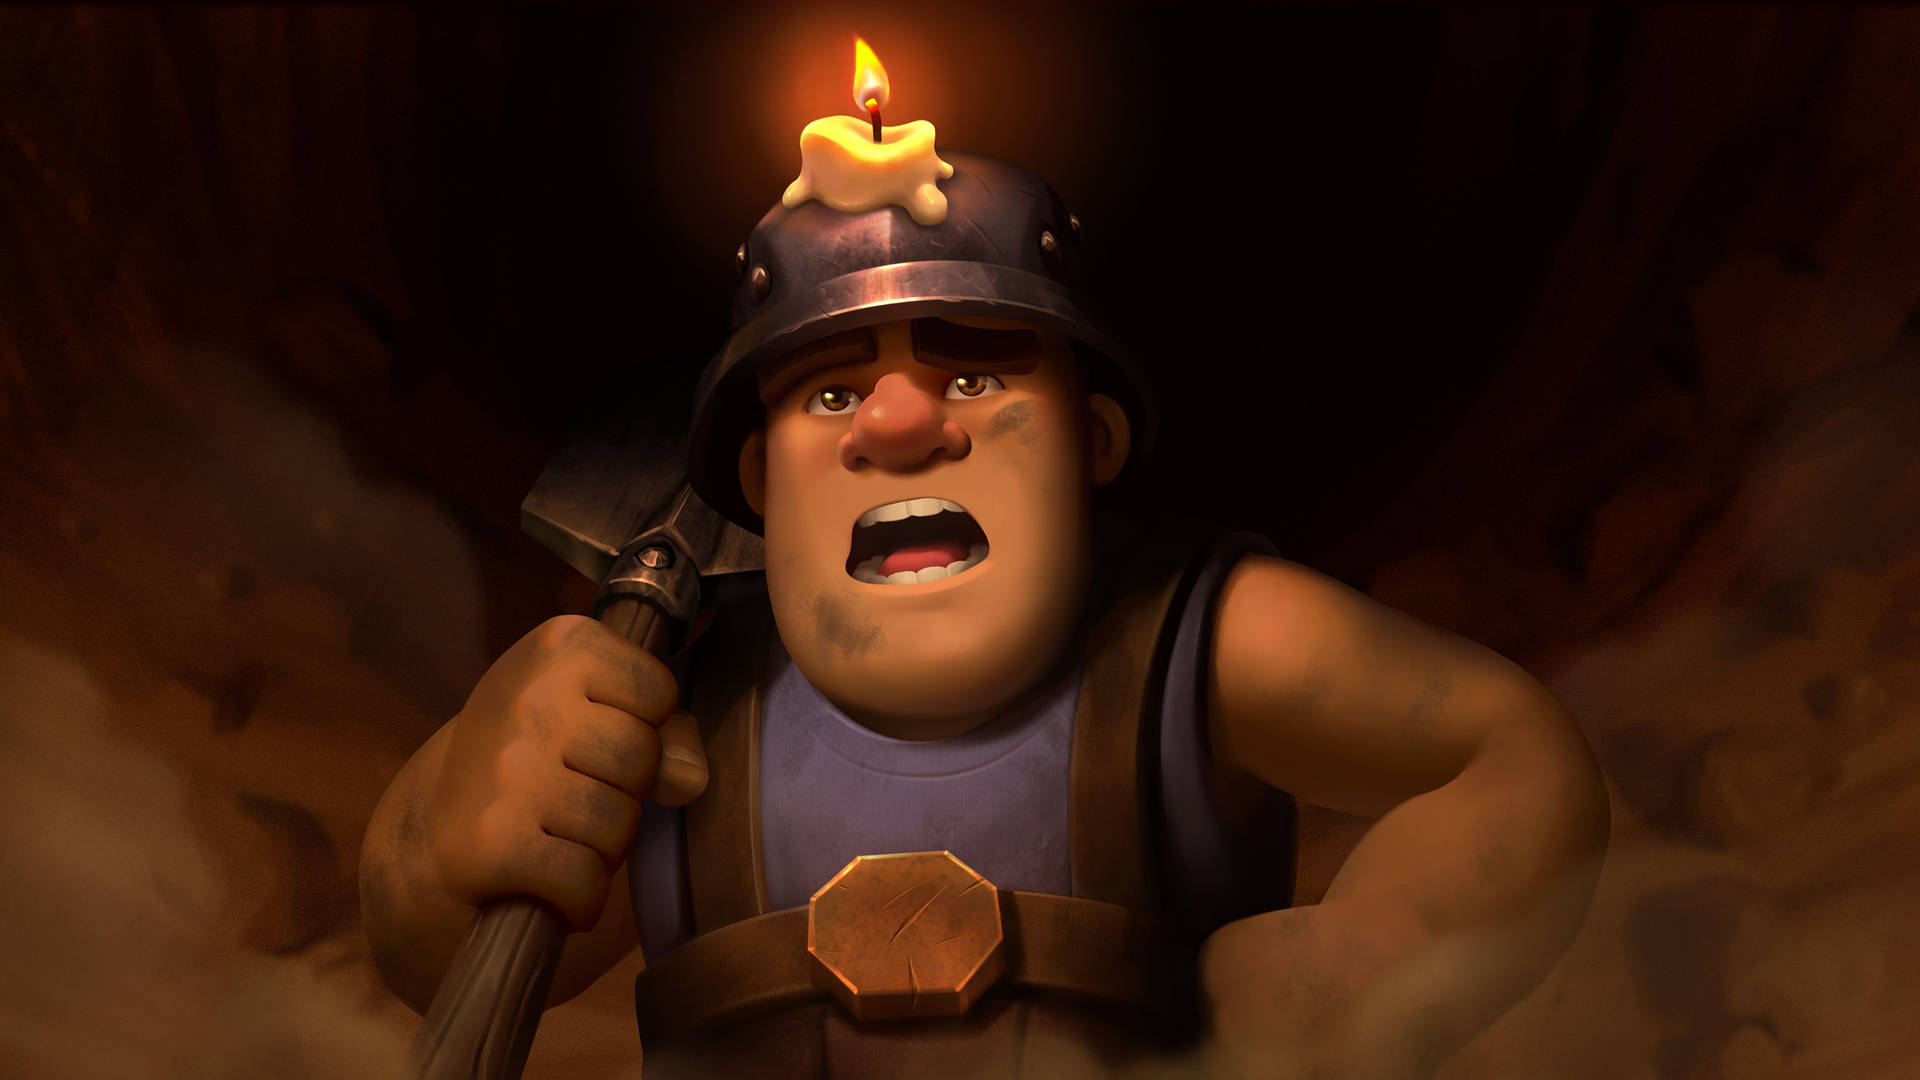 Miner From The Clash Royale Phone Game In A Cave Background